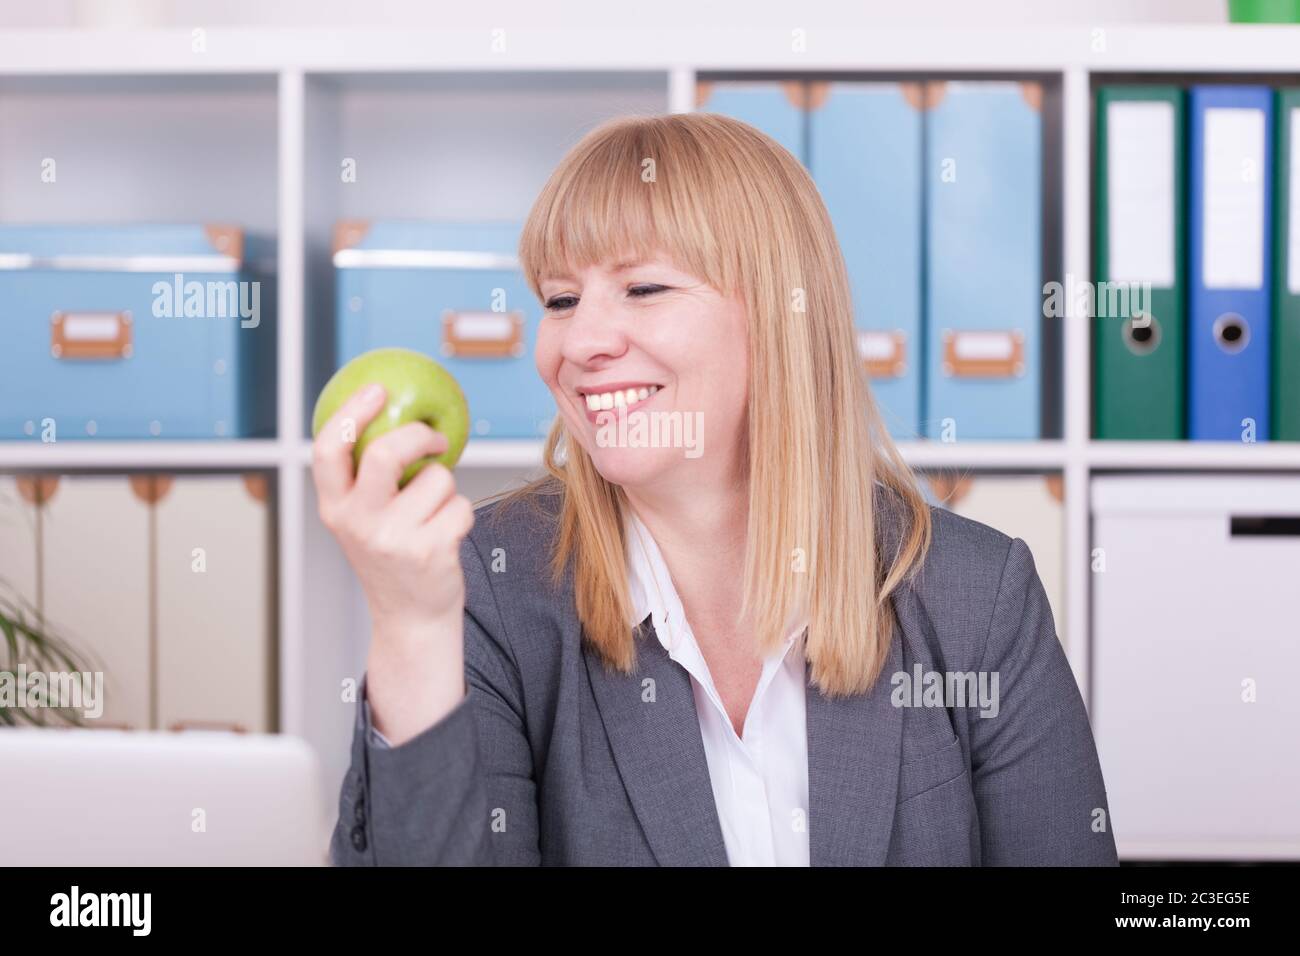 Woman at the office eating food in her break. Business, diet and healthy lifestyle concept. Stock Photo